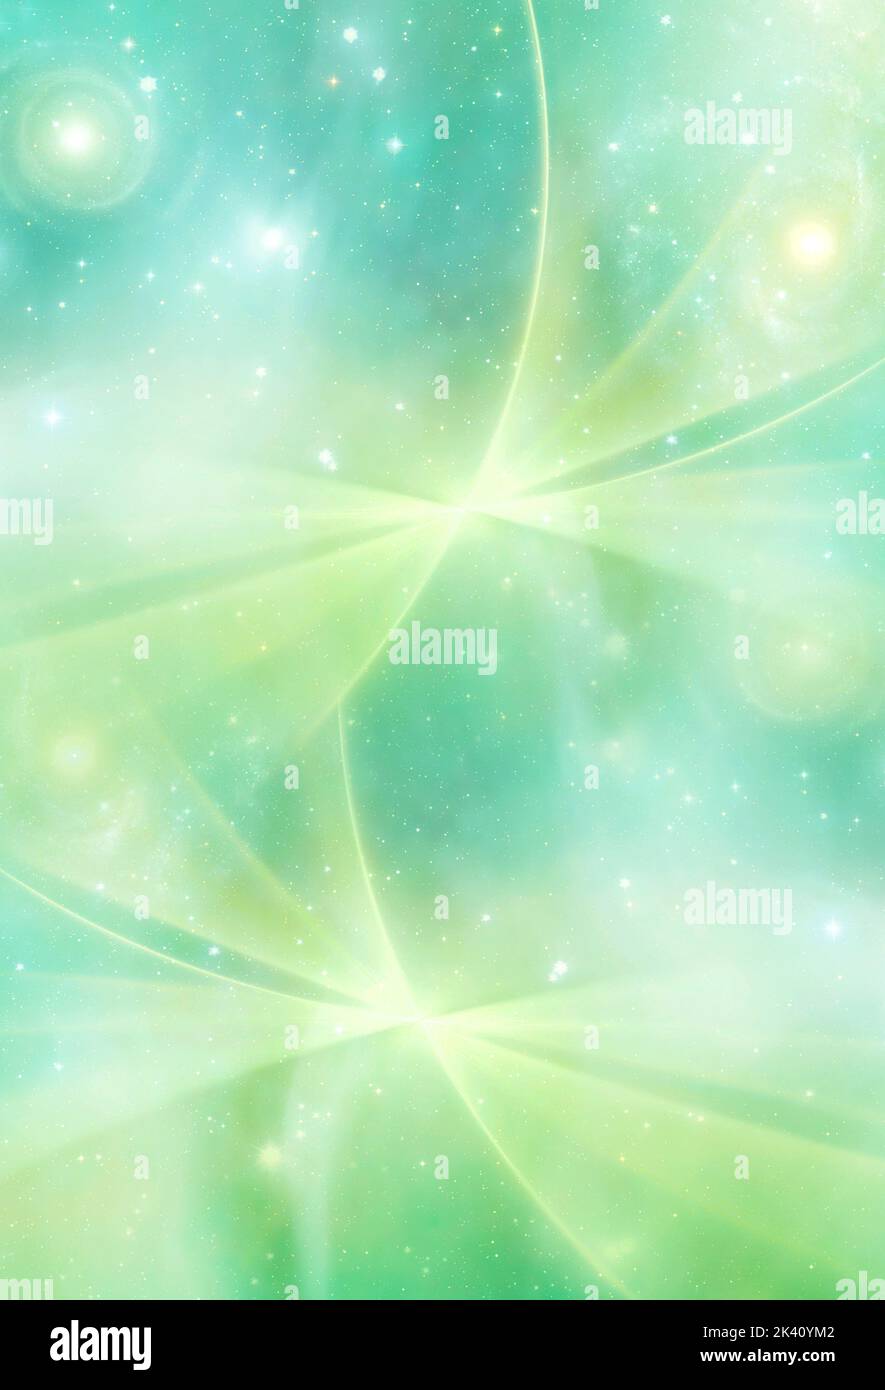 abstract mystic mystical magic fantasy background in pastel colors and stars like spiritual and angelic theme Stock Photo